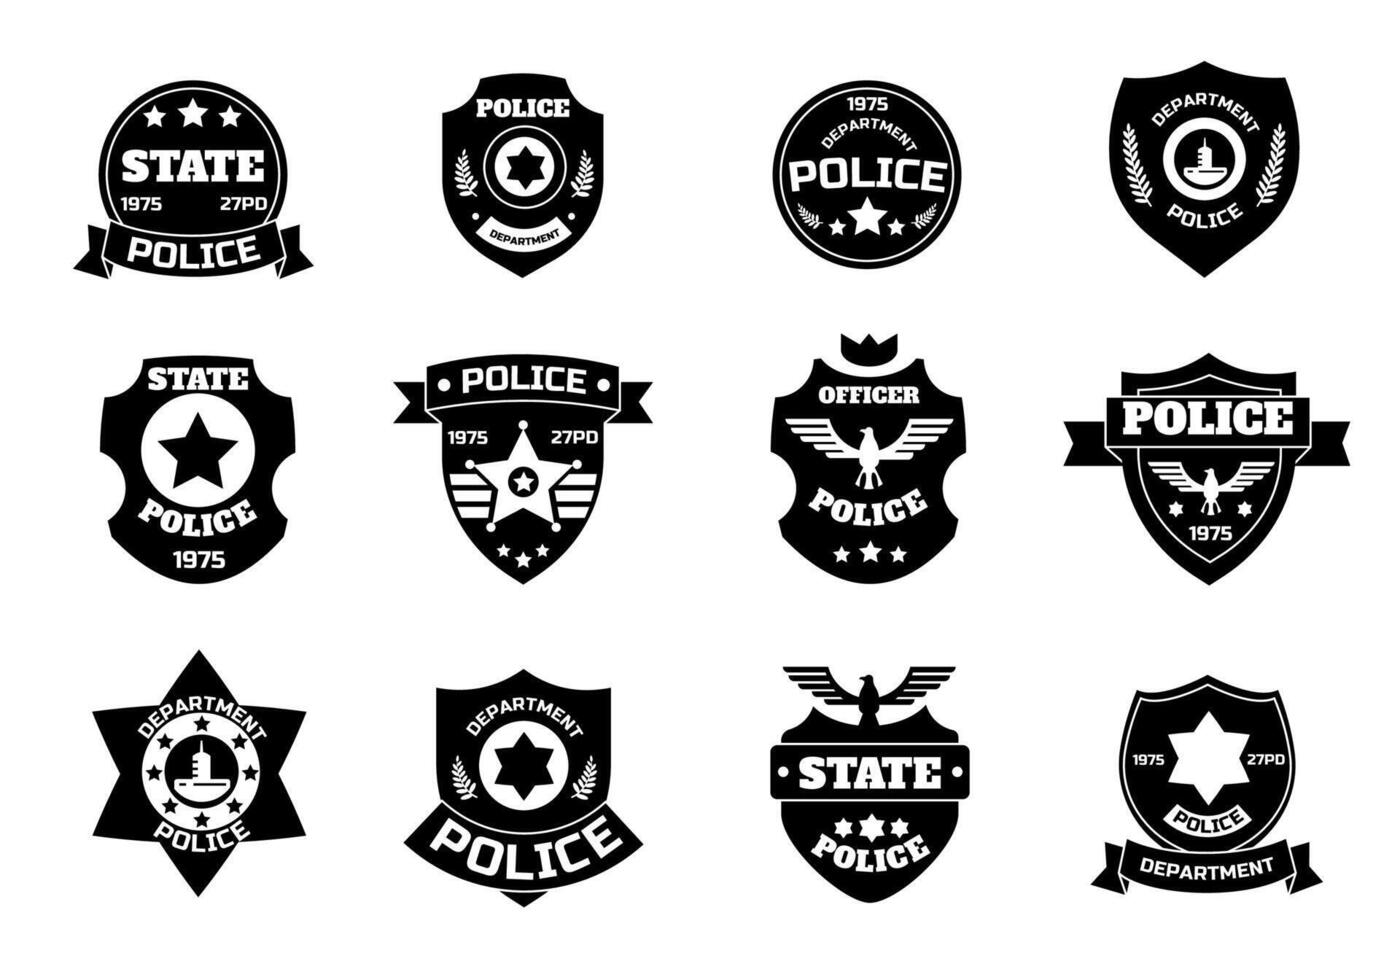 Police black symbol. Cop badge with shield and sheriff star, law enforcement officer patch insignia. Vector federal police department emblem collection